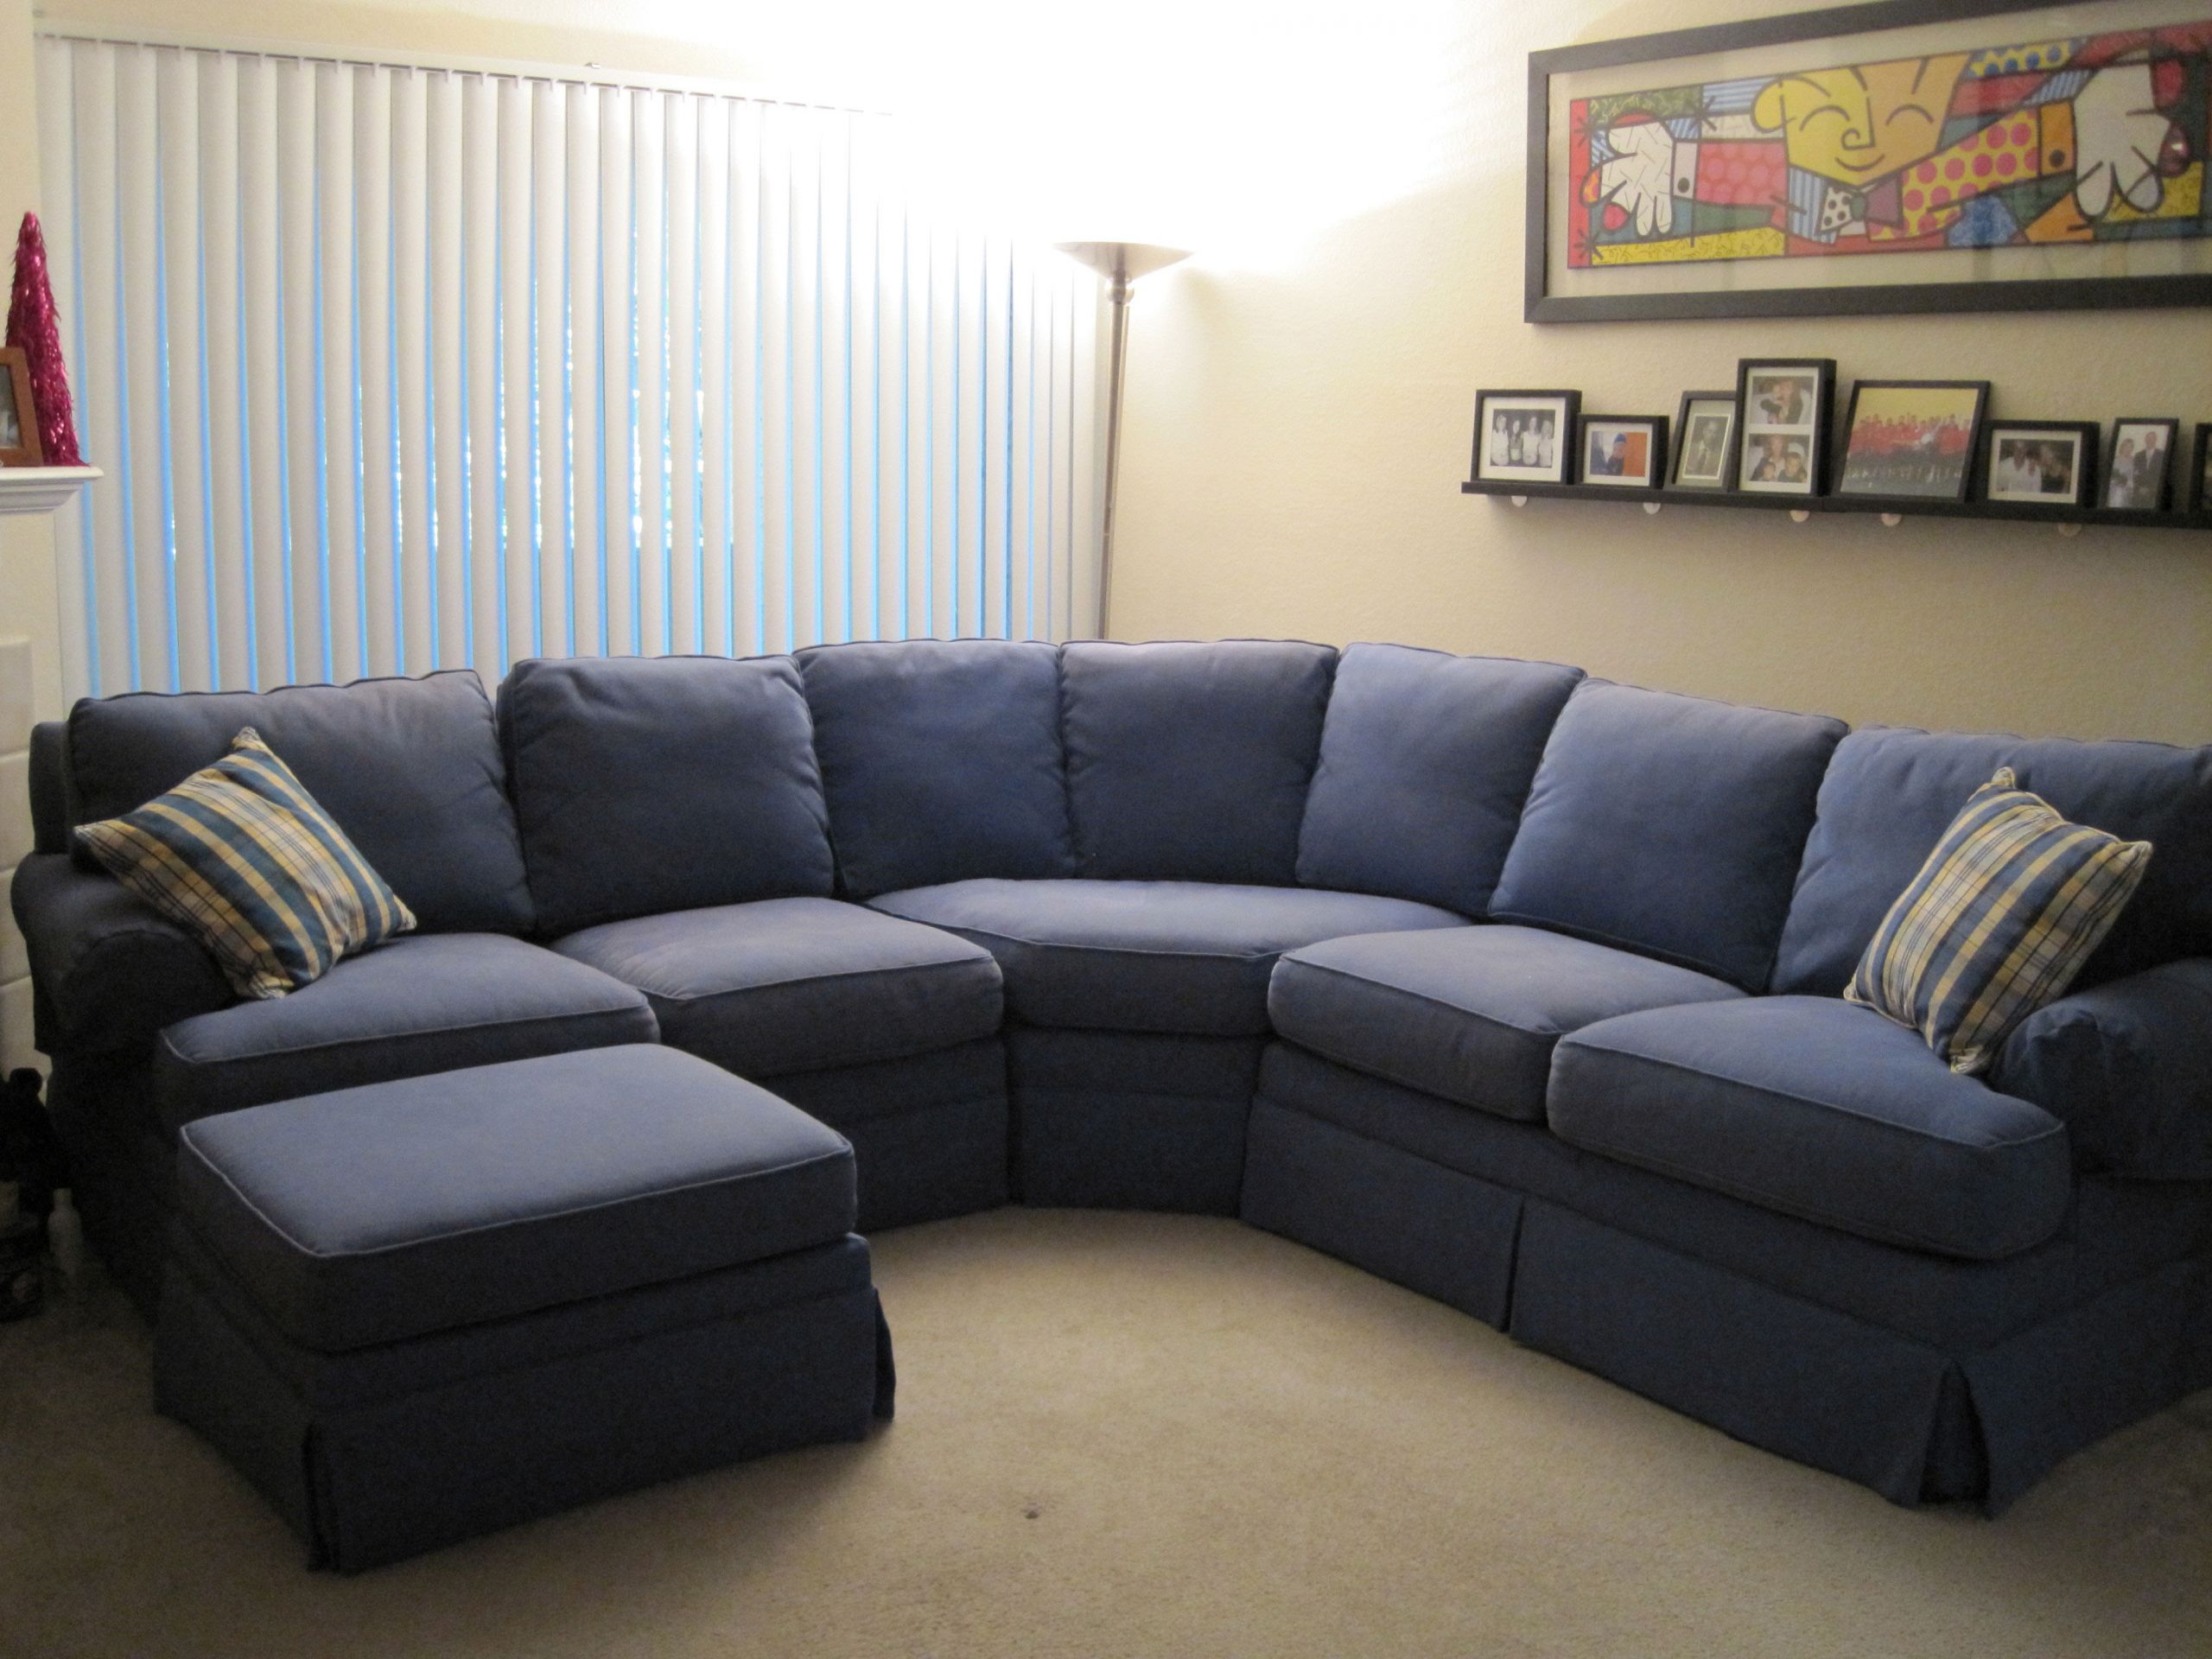 Sectional For Small Living Room
 Living Rooms with Sectionals Sofa for Small Living Room